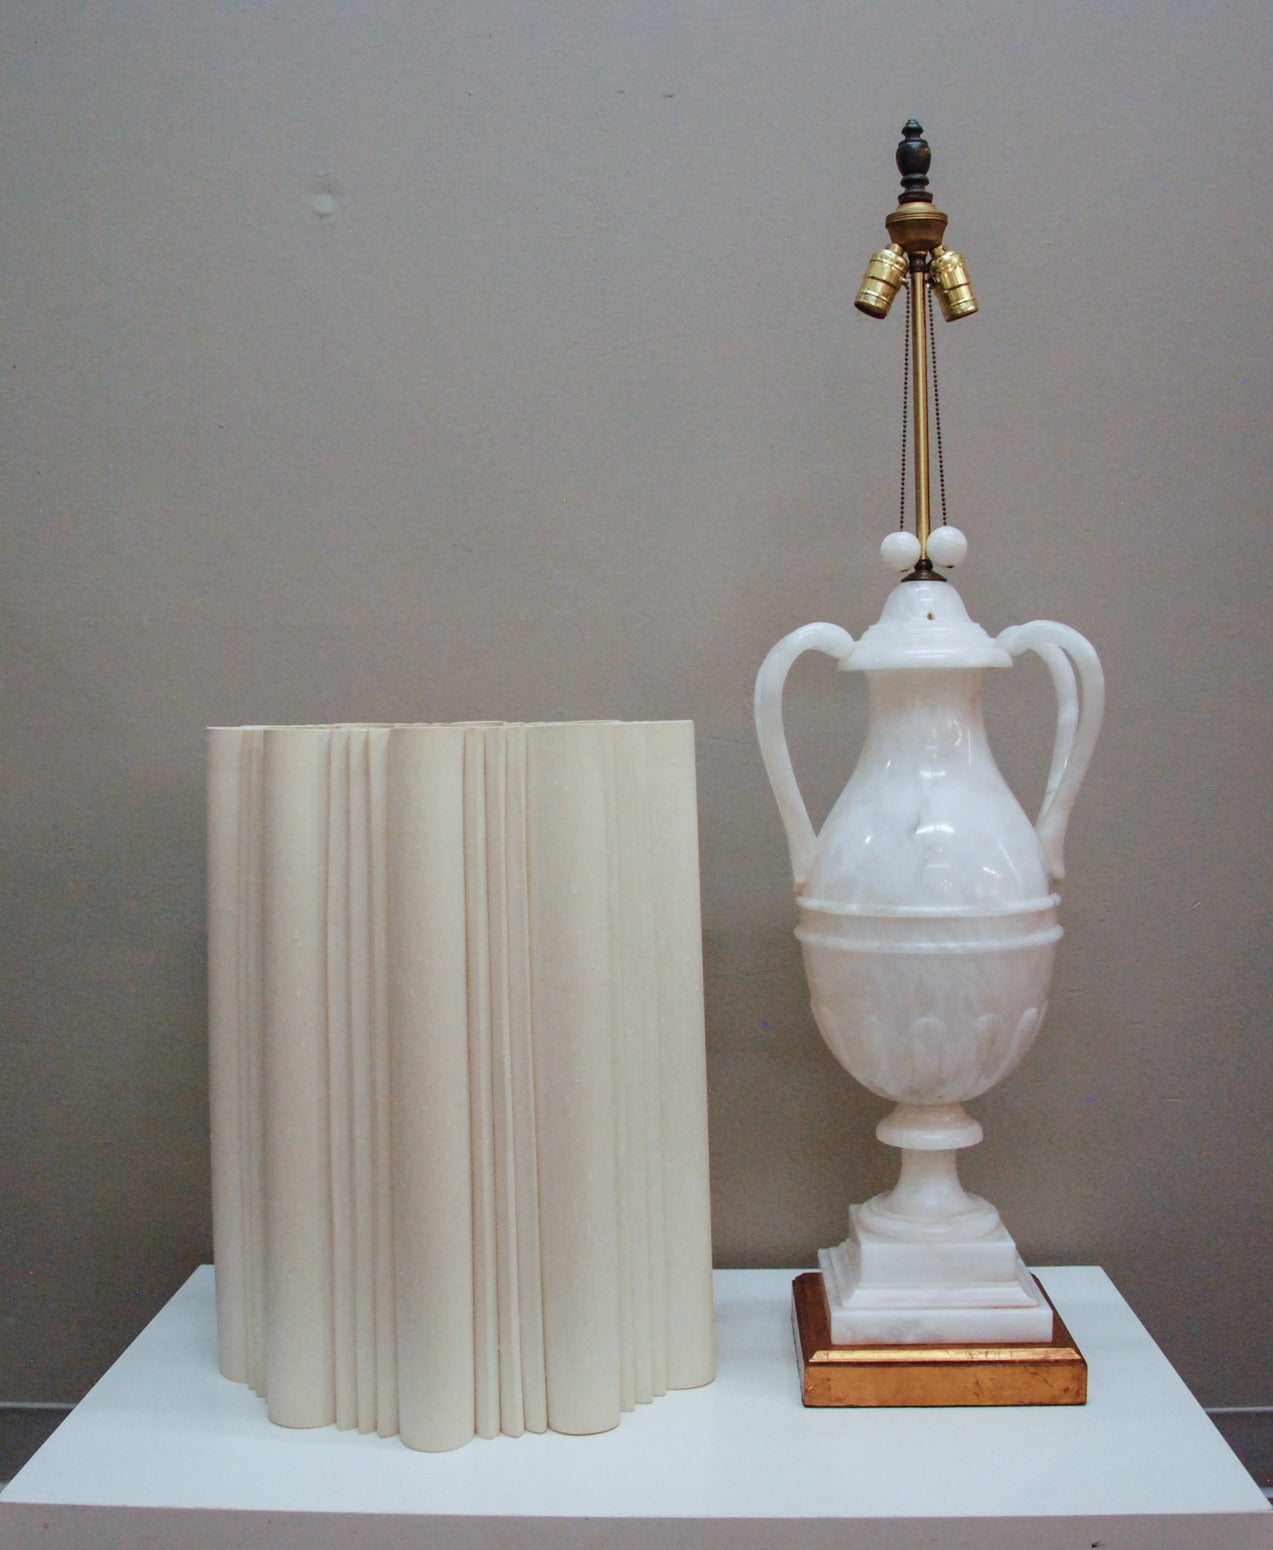 Monumental Hand-Carved Hollywood Regency Italian Alabaster Lamp, circa 1950 For Sale 1